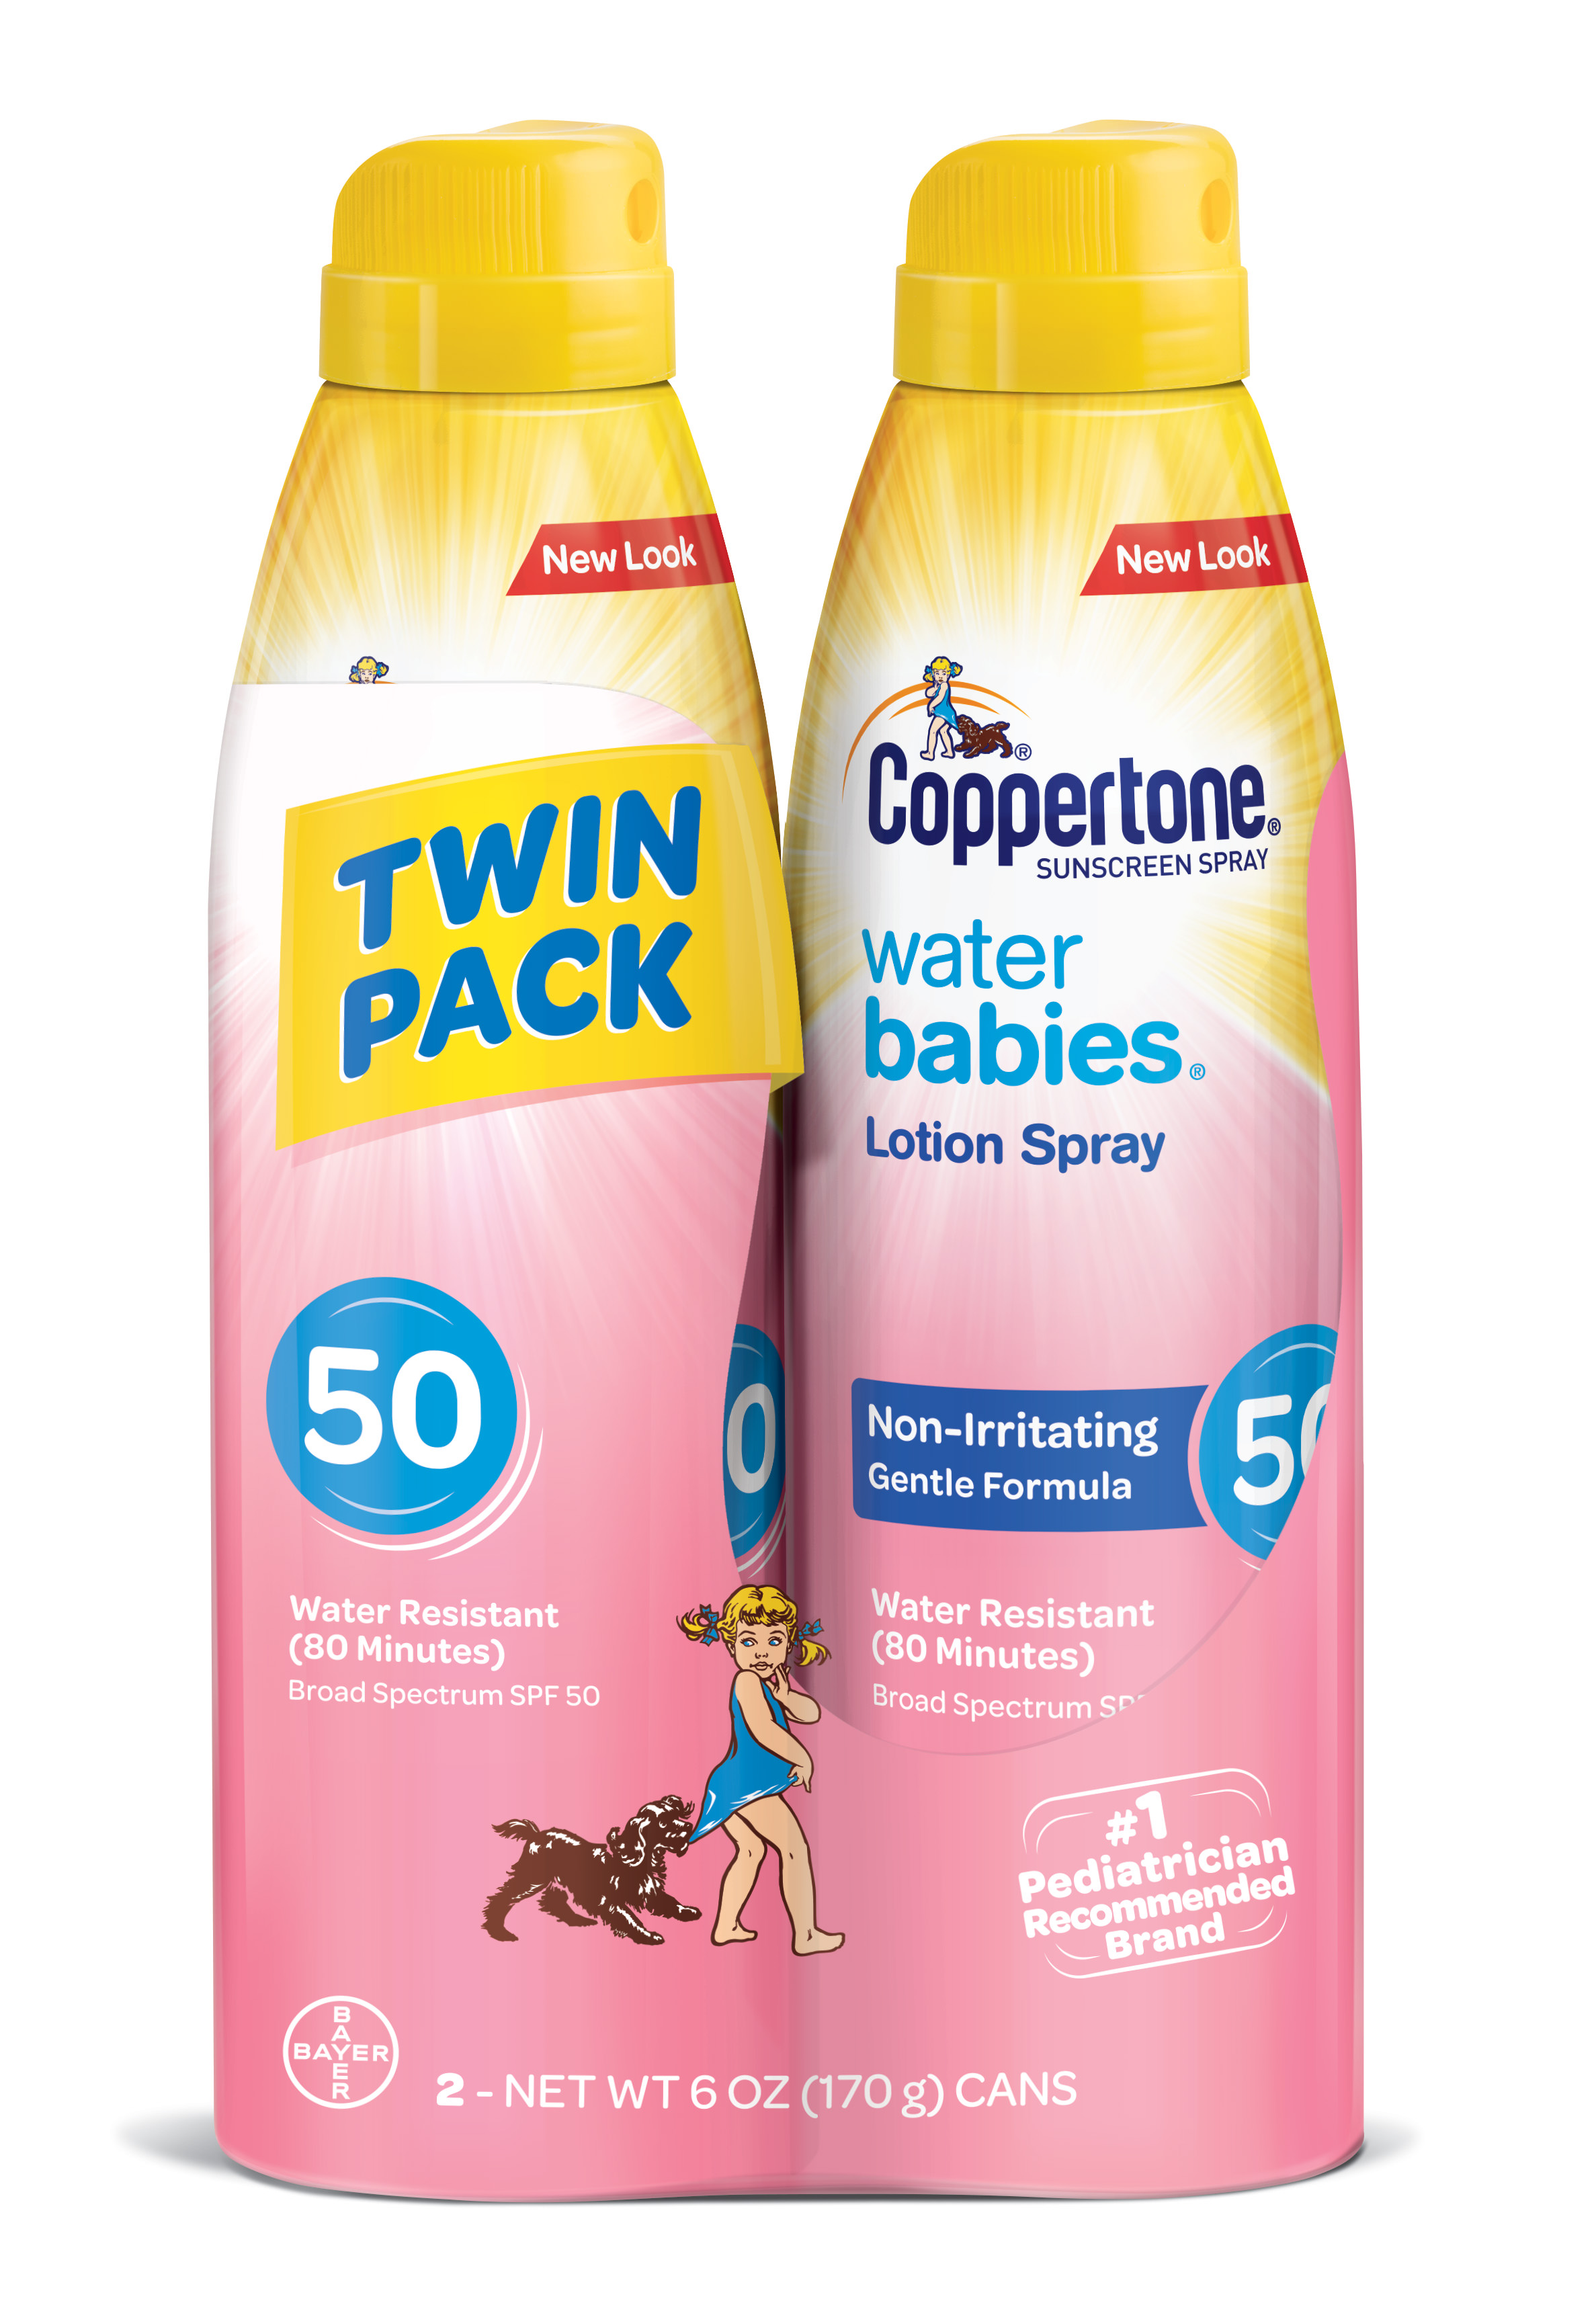 Coppertone WaterBABIES Sunscreen Spray SPF 50, Twin Pack (6 oz each) - image 1 of 5